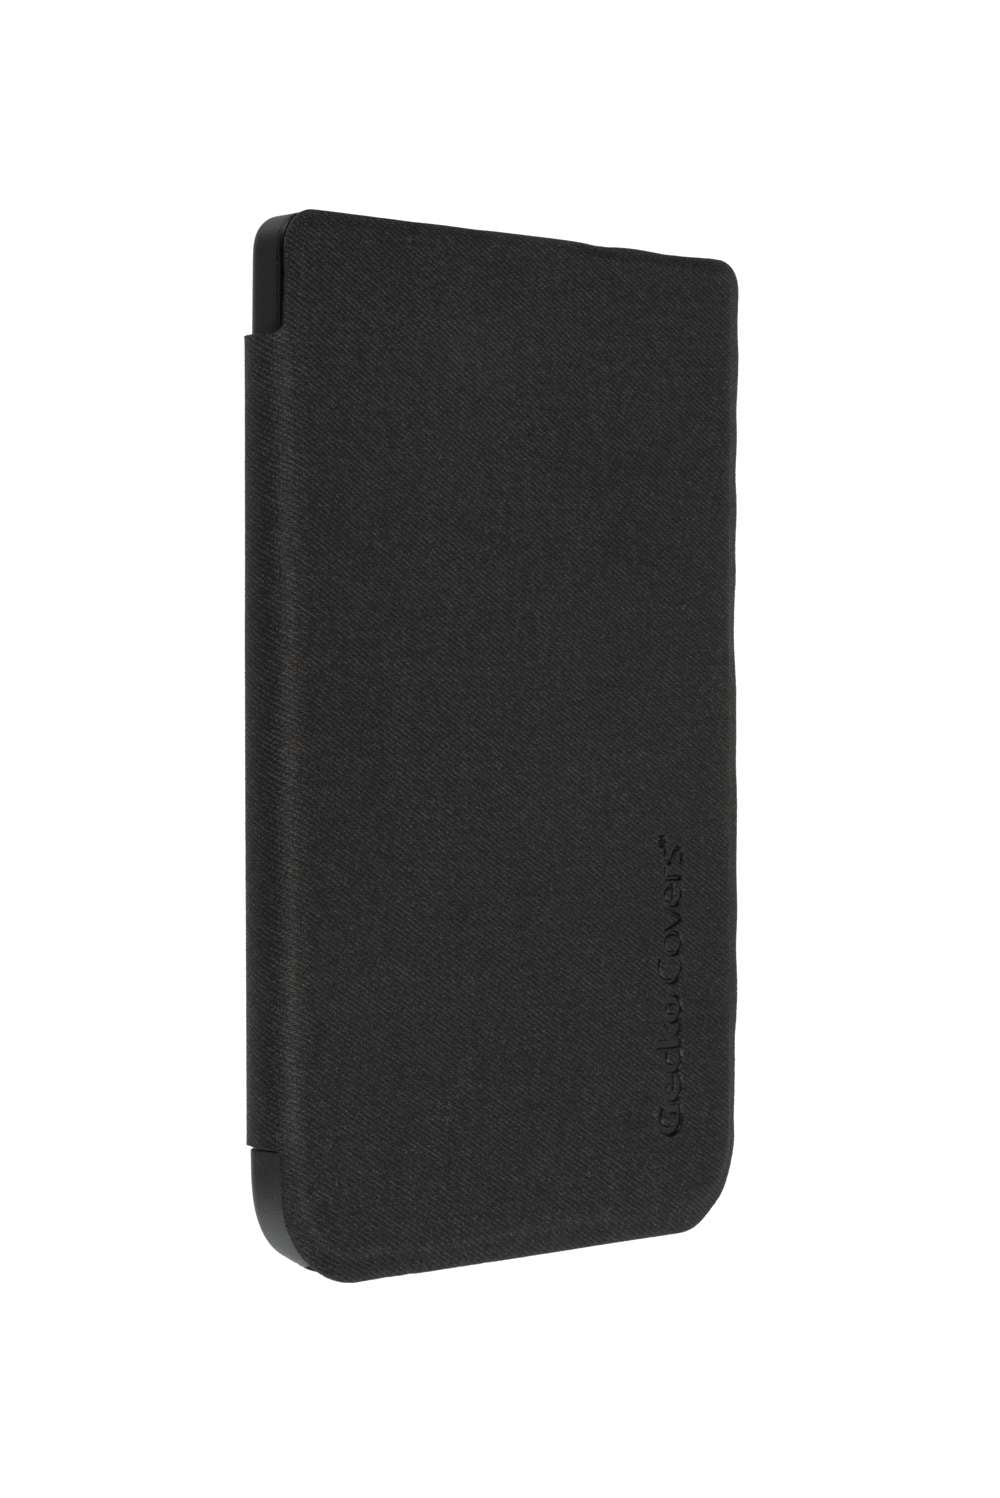 V27T01C1 - E-Reader case - PocketBook Touch HD 3 & Touch Lux 5 - Black